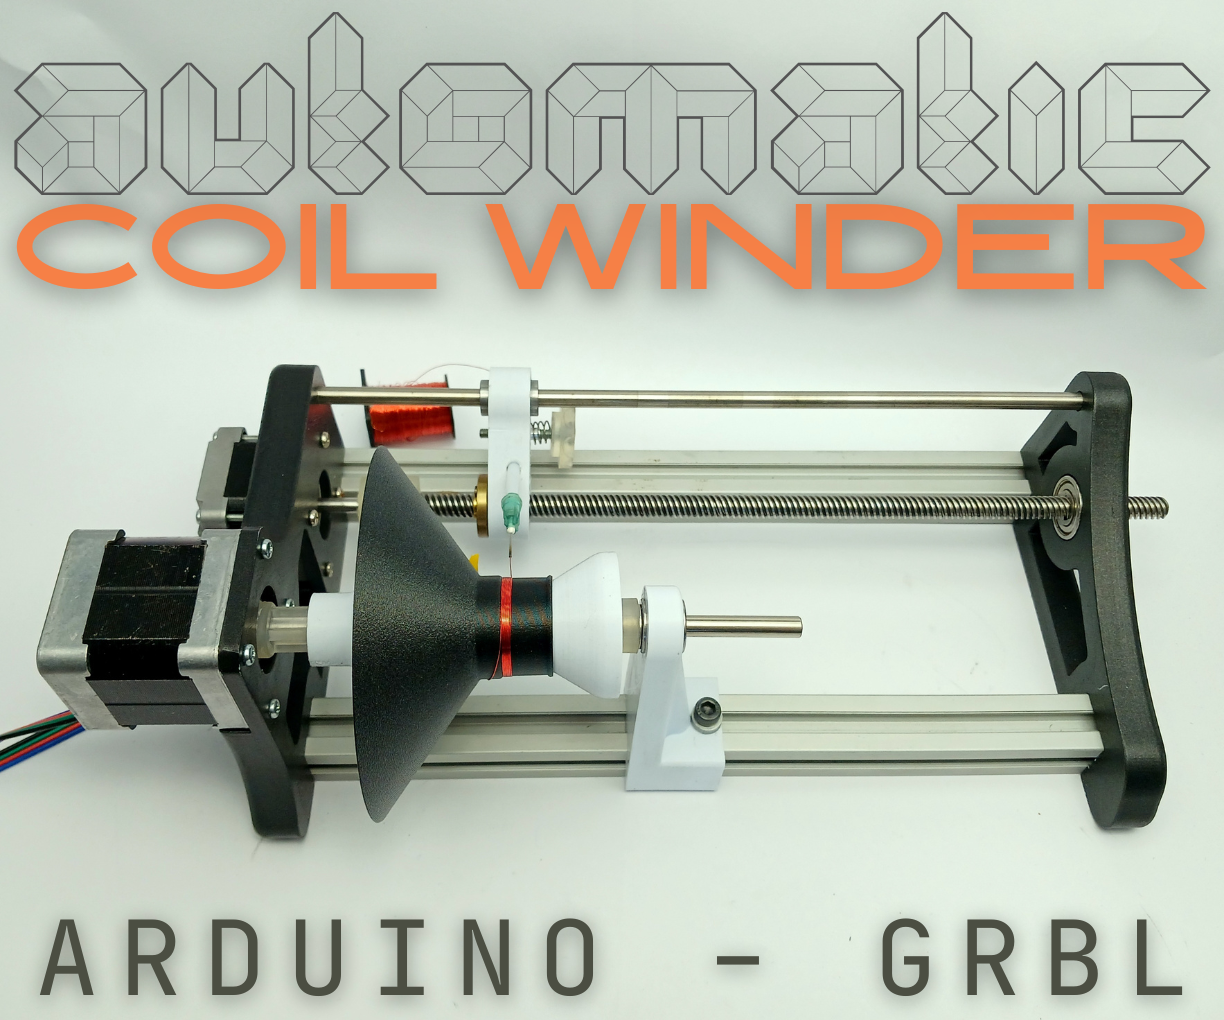 Arduino/GRBL Based Desktop Automatic Coil Winder!